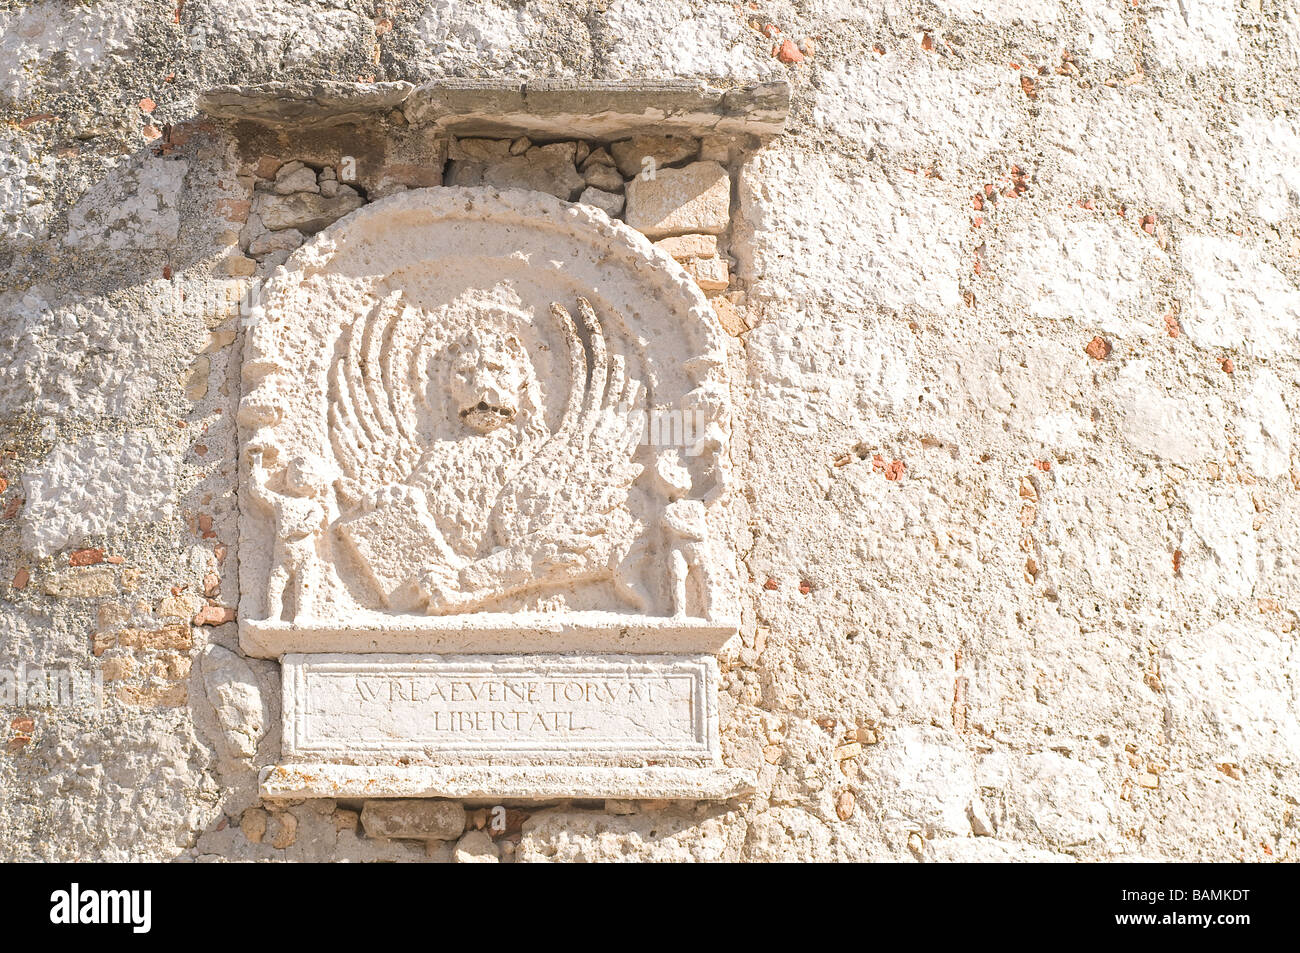 an ancient bas-relief depicting the lion of St. Mark, a symbol of Venice, on a wall in the center of Baska, Island of Krk, Croatia Stock Photo